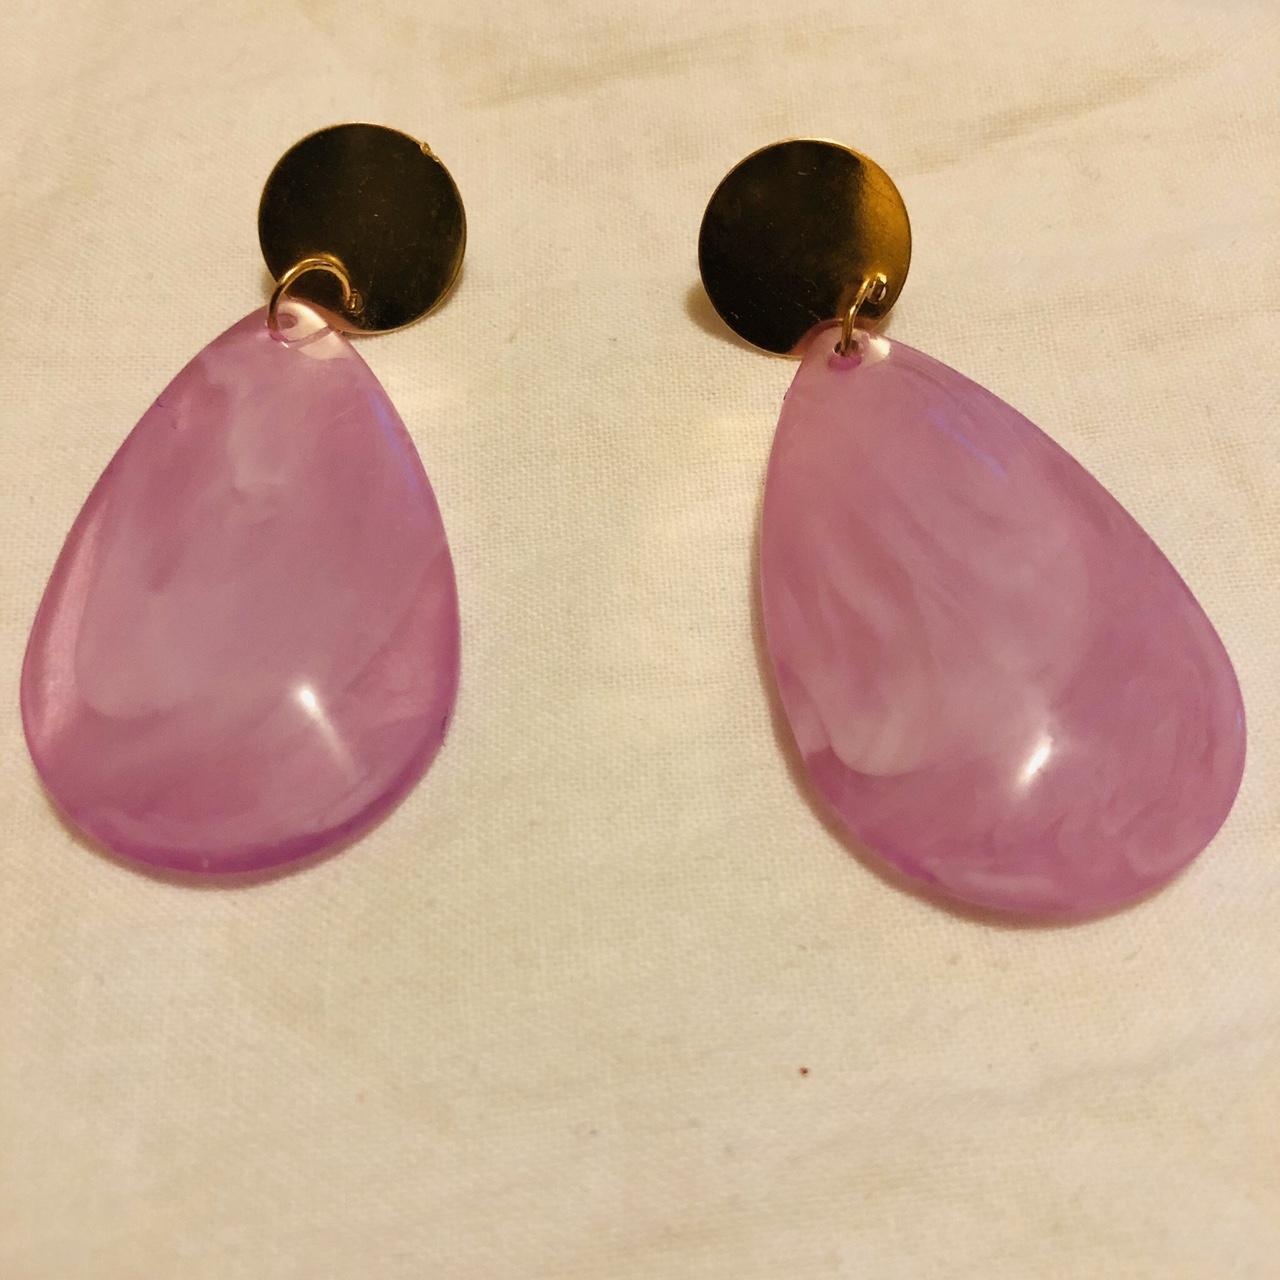 Product Image 1 - Pink glass earrings